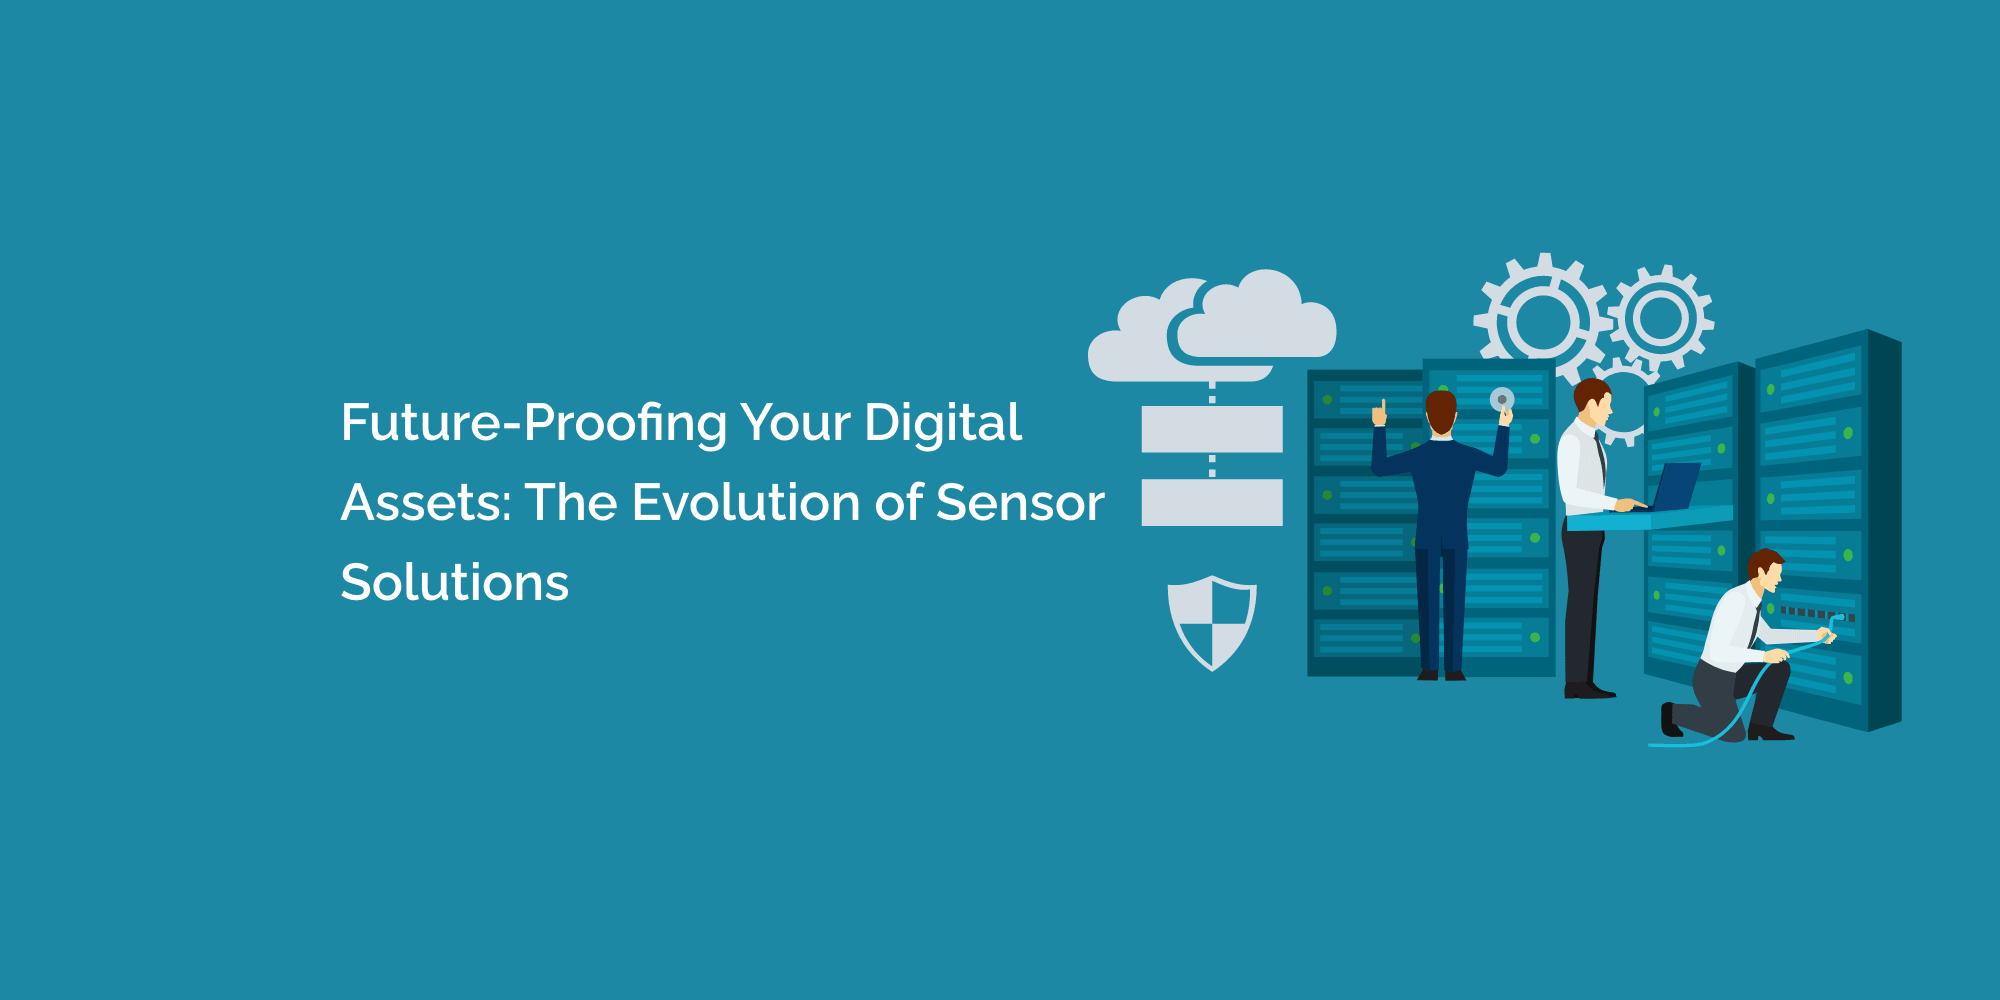 Future-Proofing Your Digital Assets: The Evolution of Sensor Solutions